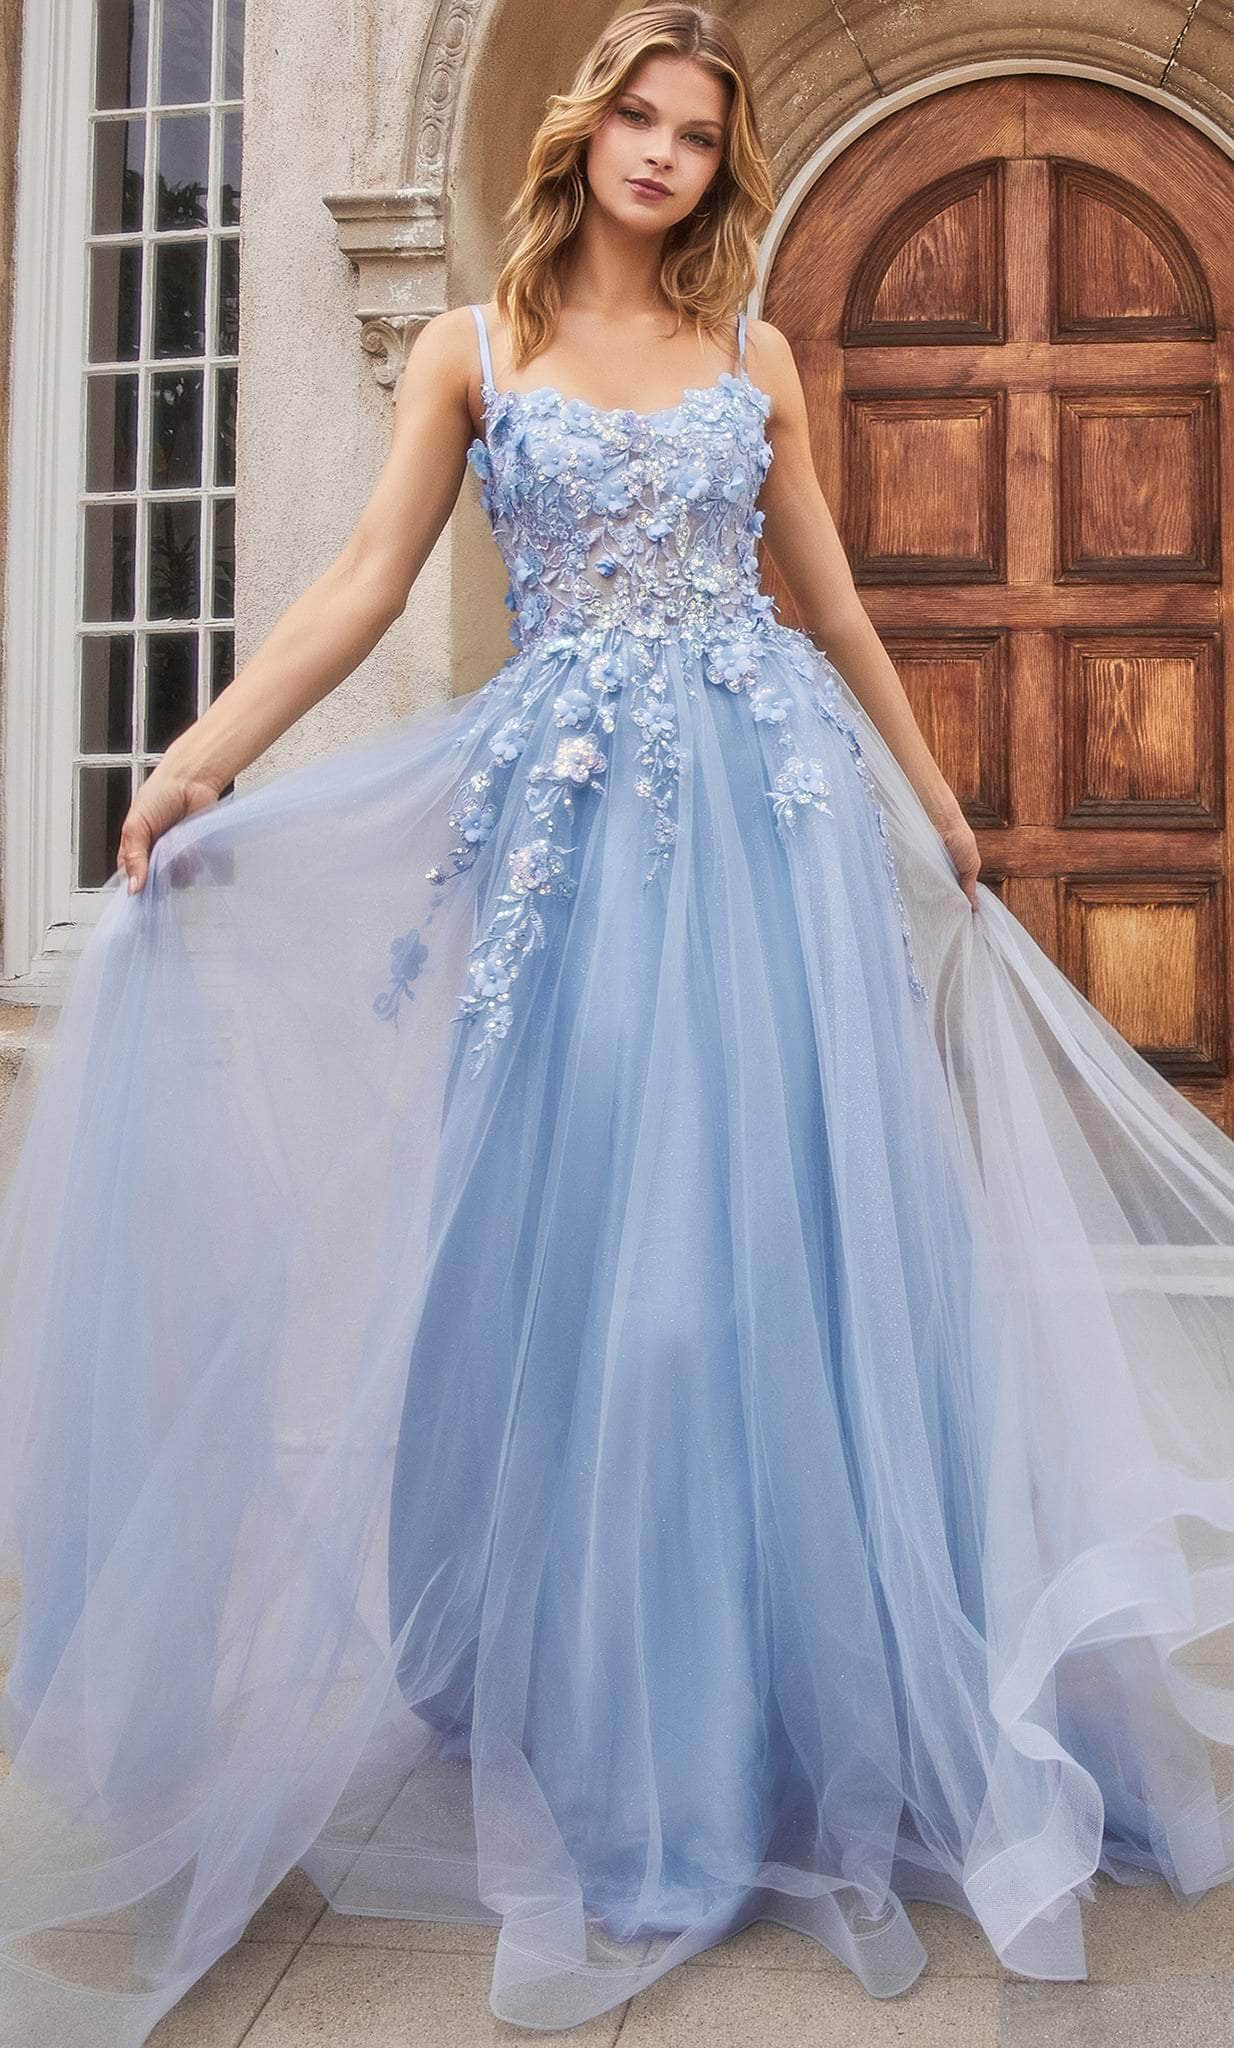 Andrea and Leo A1142 - Scoop Floral Appliqued Prom Gown Special Occasion Dress 2 / Blue